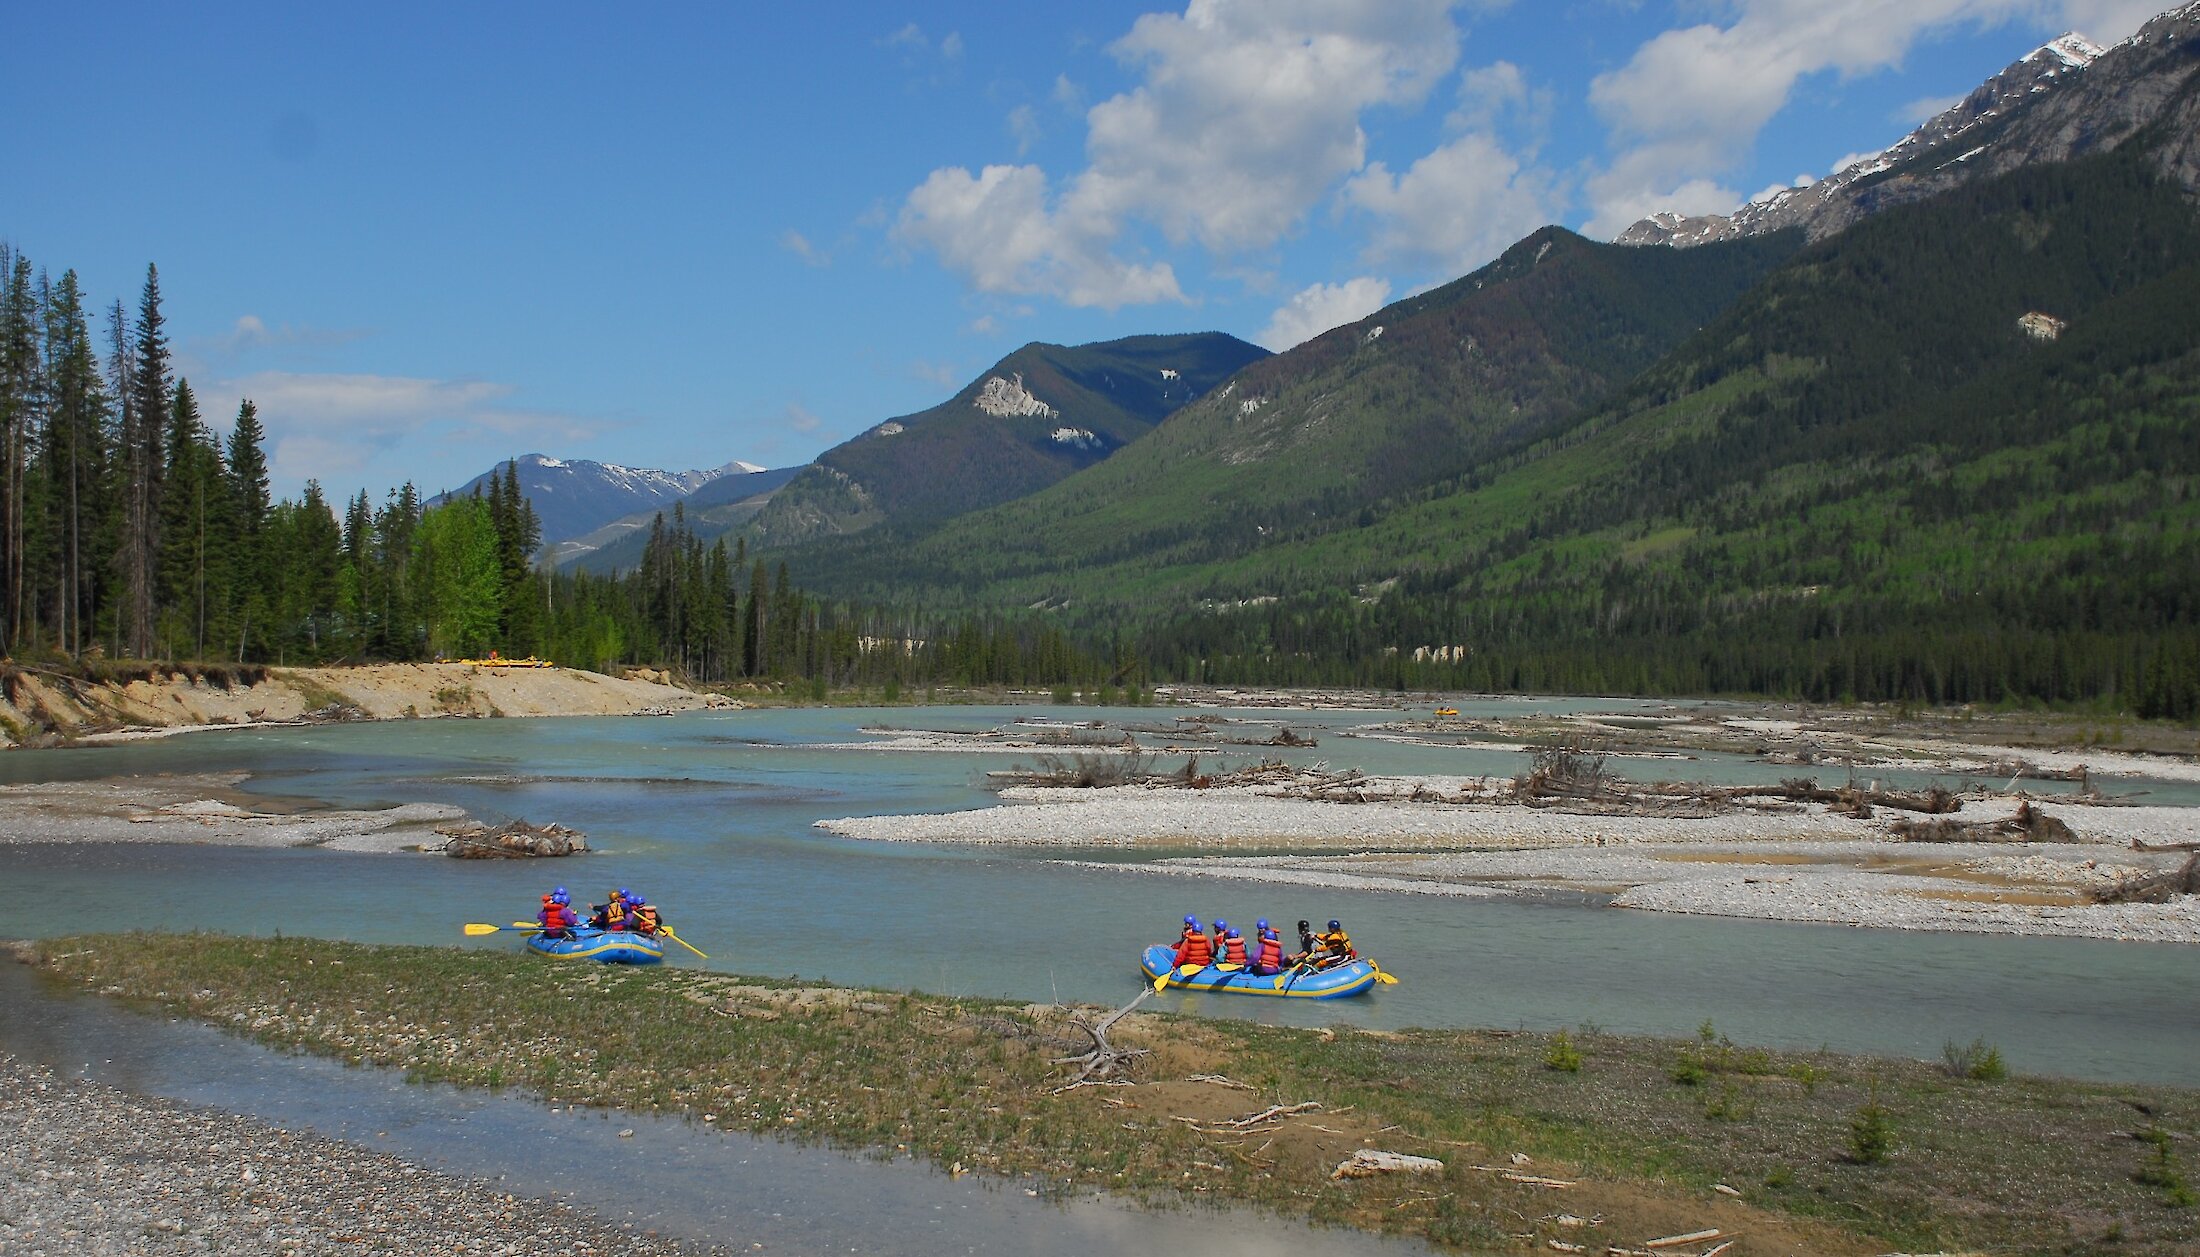 The upper section of the Kicking Horse River